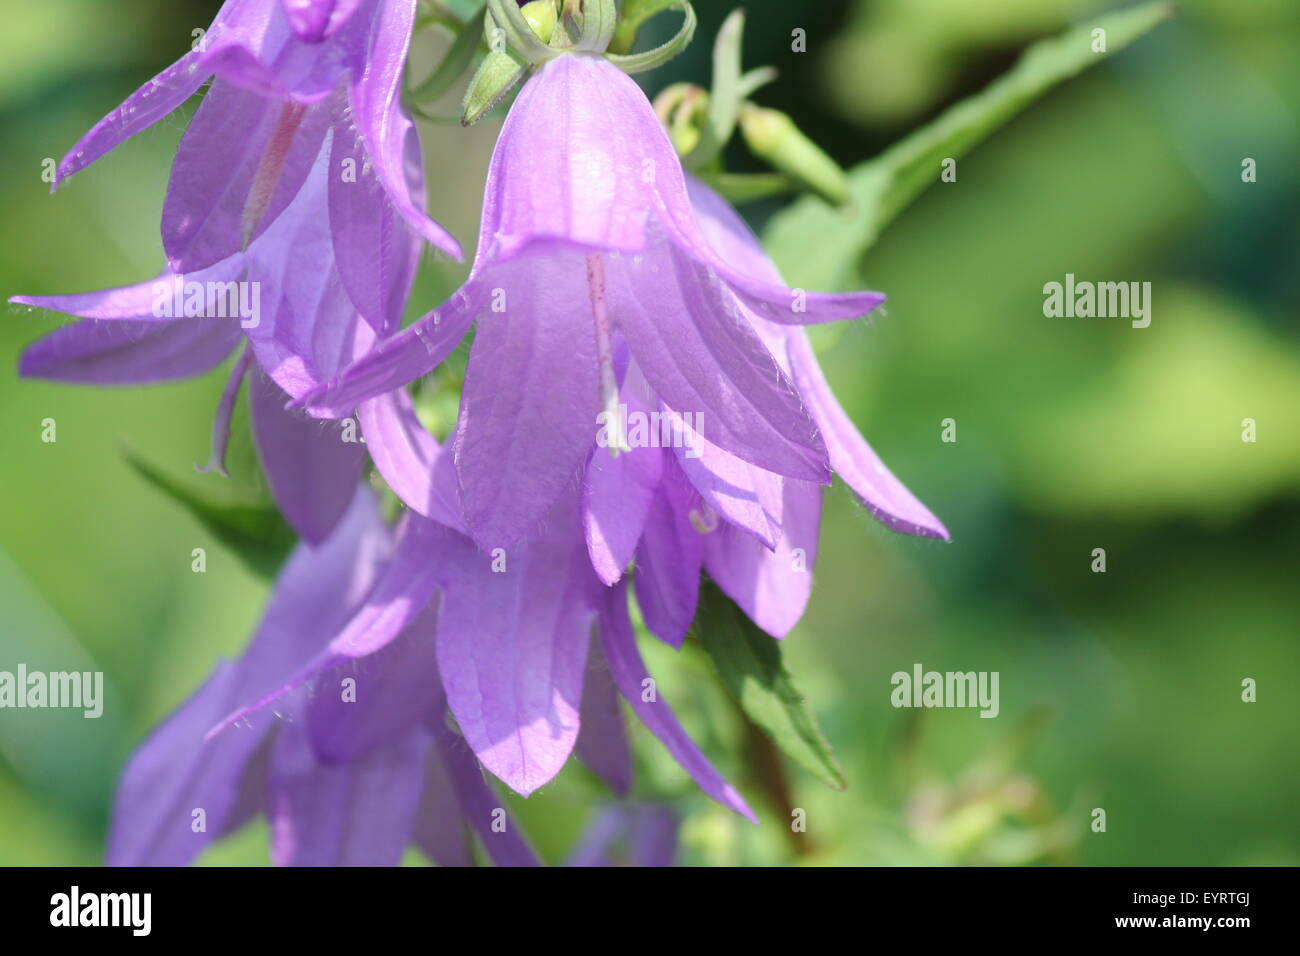 Creeping Bellflower (Campanula rapunculoides), pretty purple-violet invasive weed, bell shaped flower growing in a flower garden Stock Photo